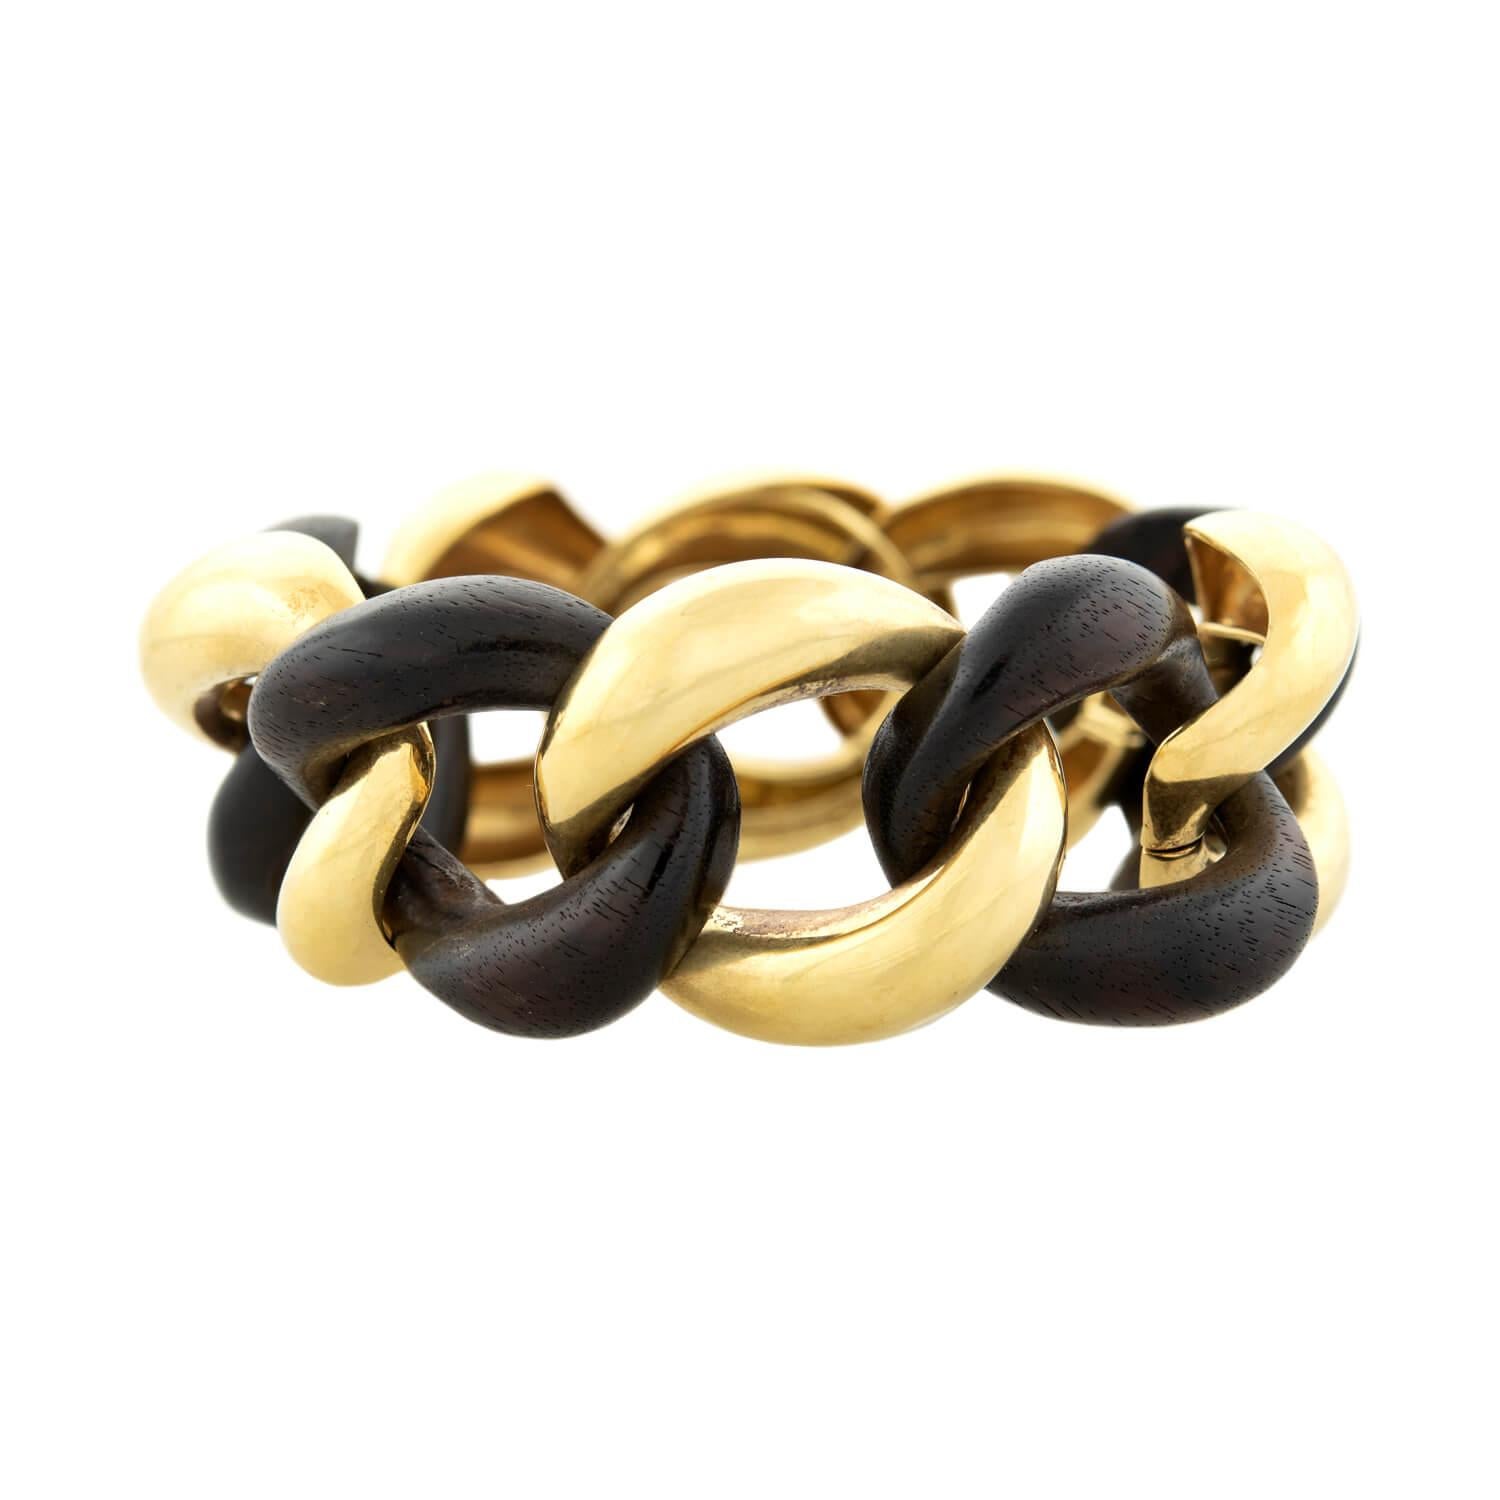 A beautiful estate curb link bracelet from the high end designer Valentin Magro! This substantial piece is comprised of large interlocking curb links, which alternate in material between vibrant 18k and a striking, dark wood. The gold links are